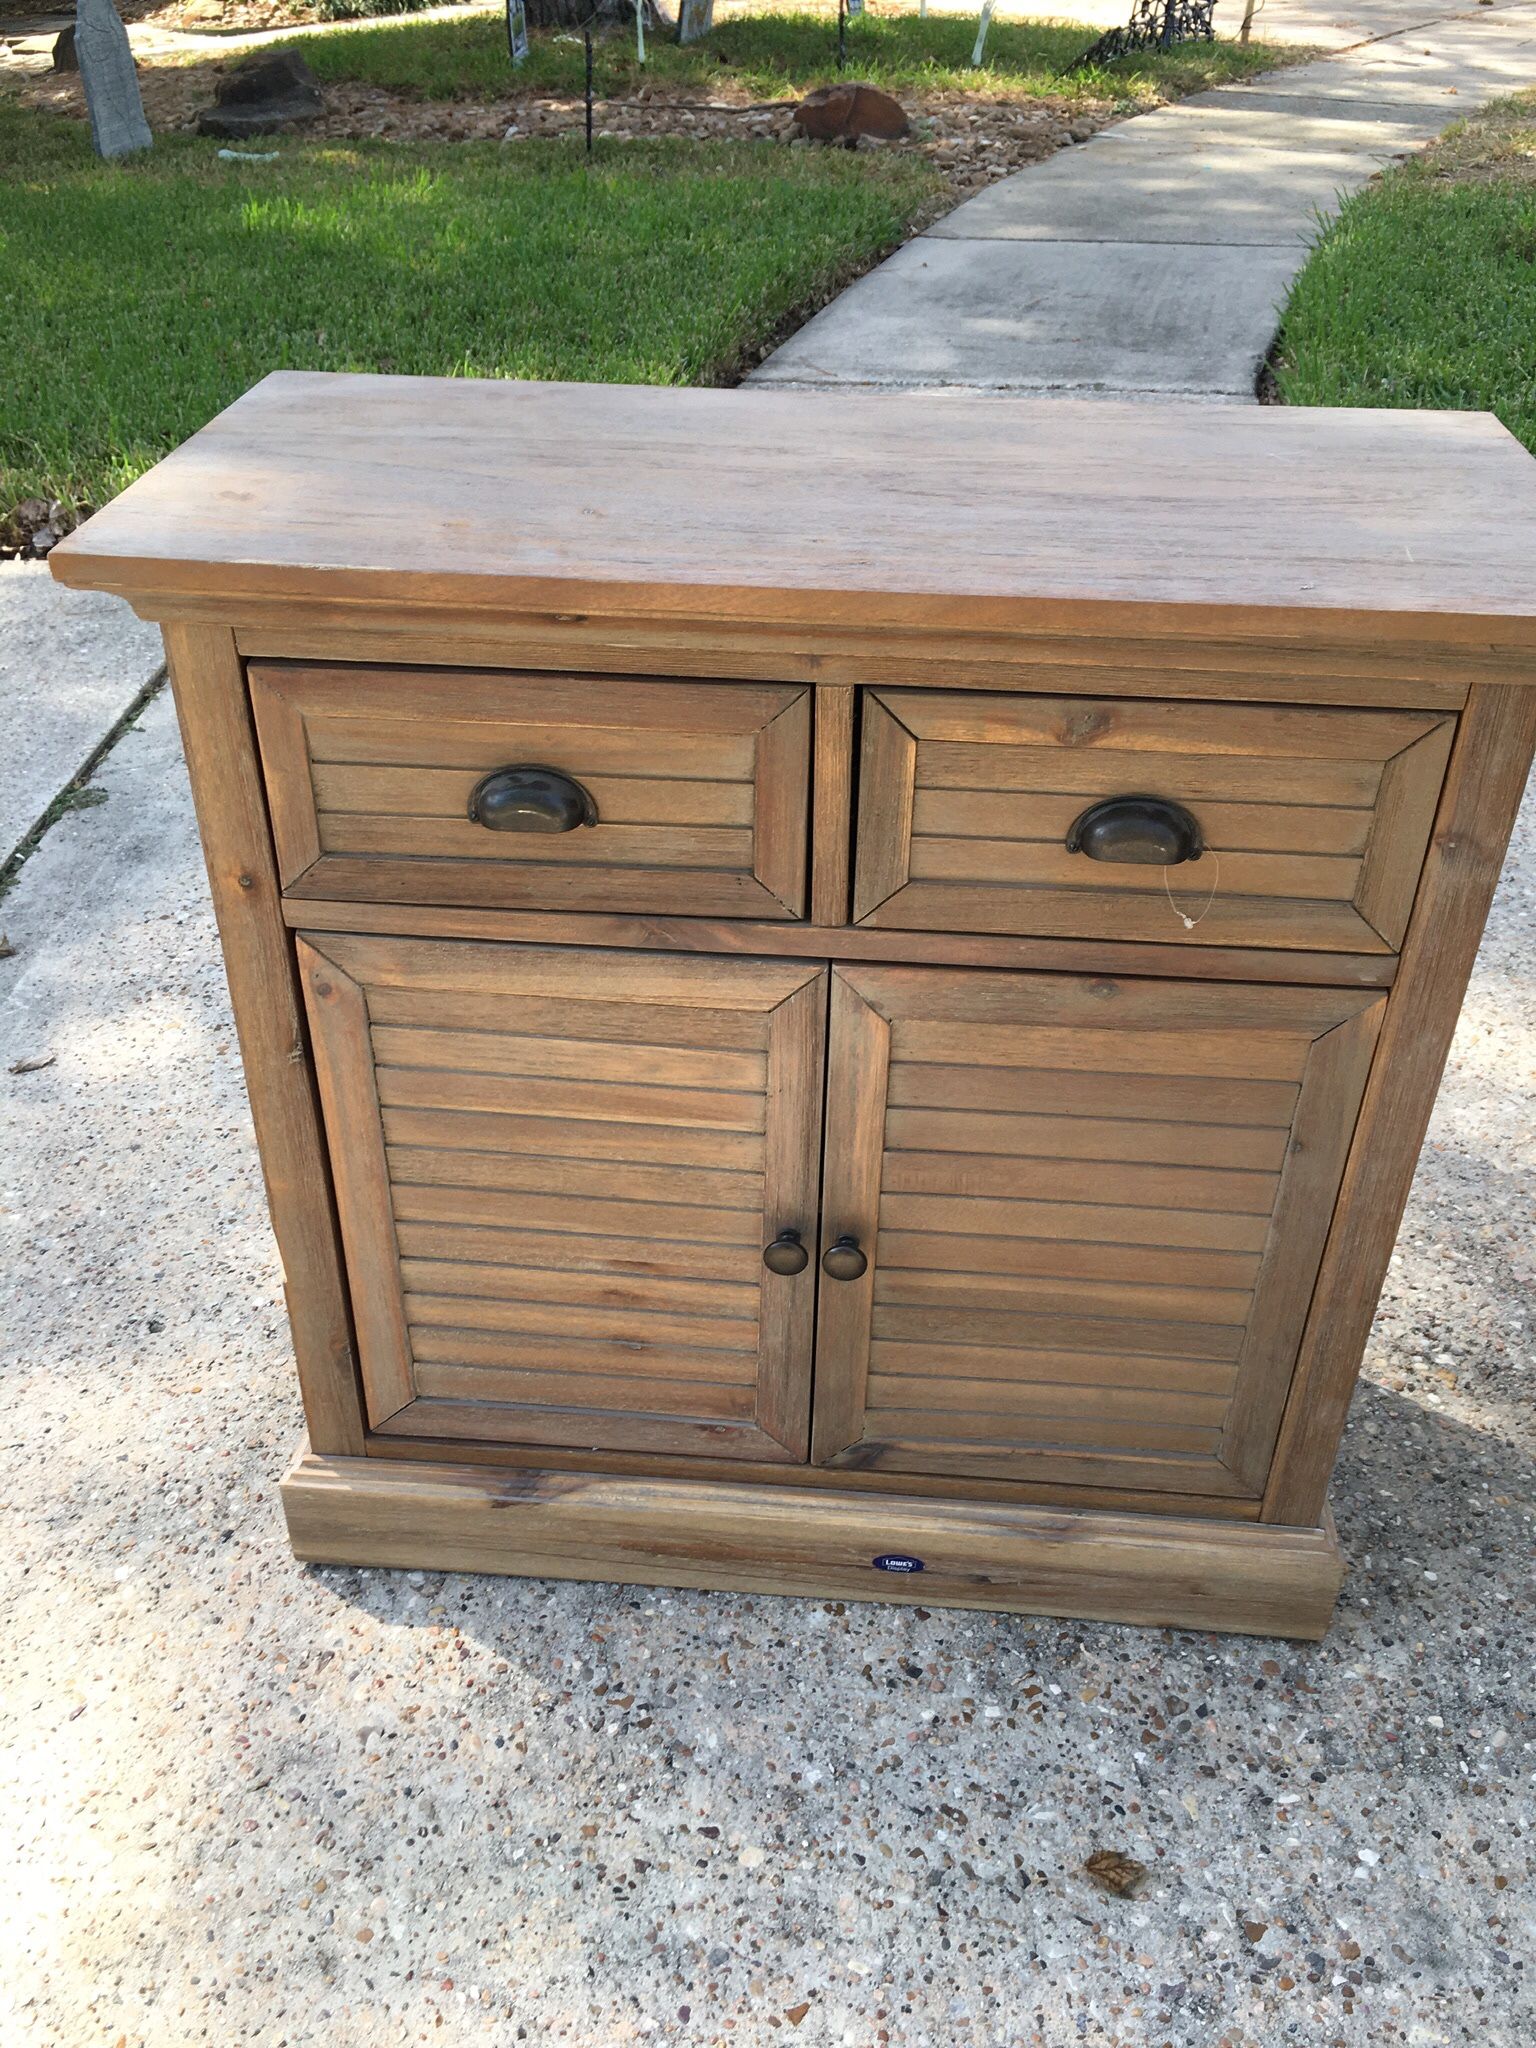 Has small Chip . allen + roth  31-in x 31-in Weathered Wood Buff Wood Desk Hutch $175.00 O’B’O’ W 31-in X D 14-in X H 31-in